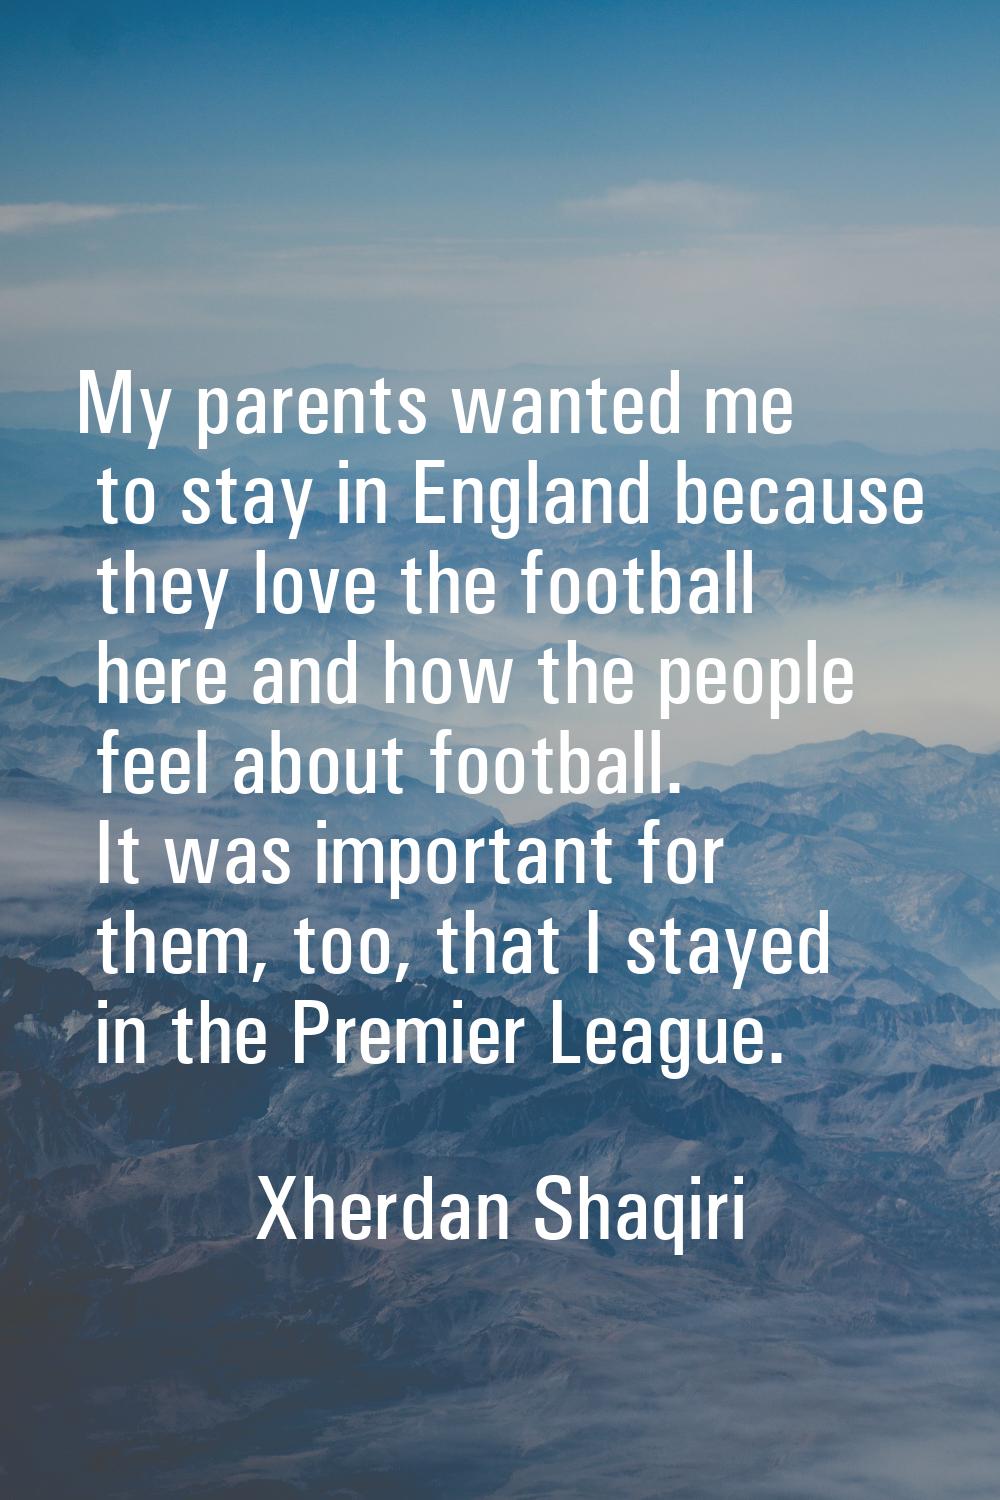 My parents wanted me to stay in England because they love the football here and how the people feel